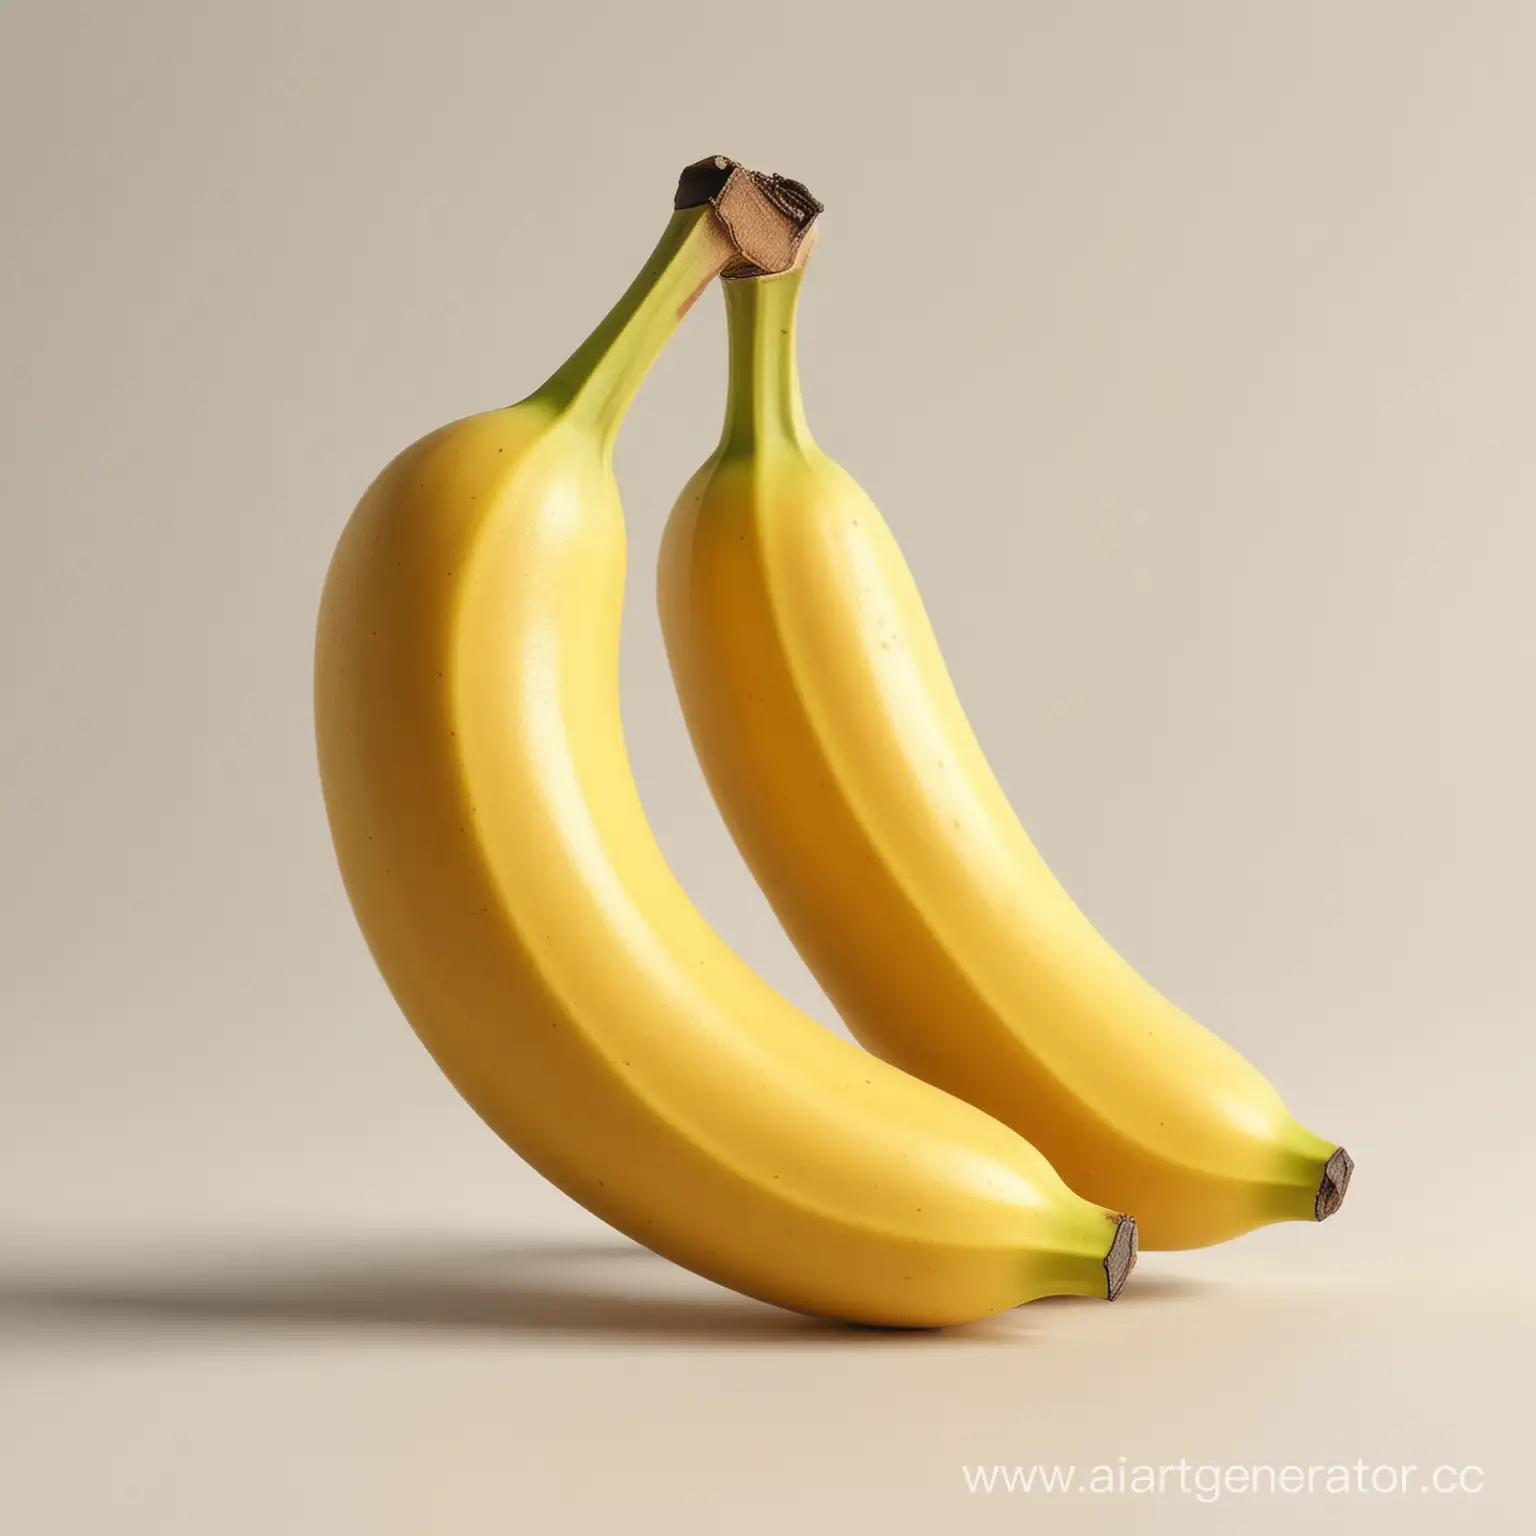 Two-Cartoonish-Bananas-on-Clean-White-Background